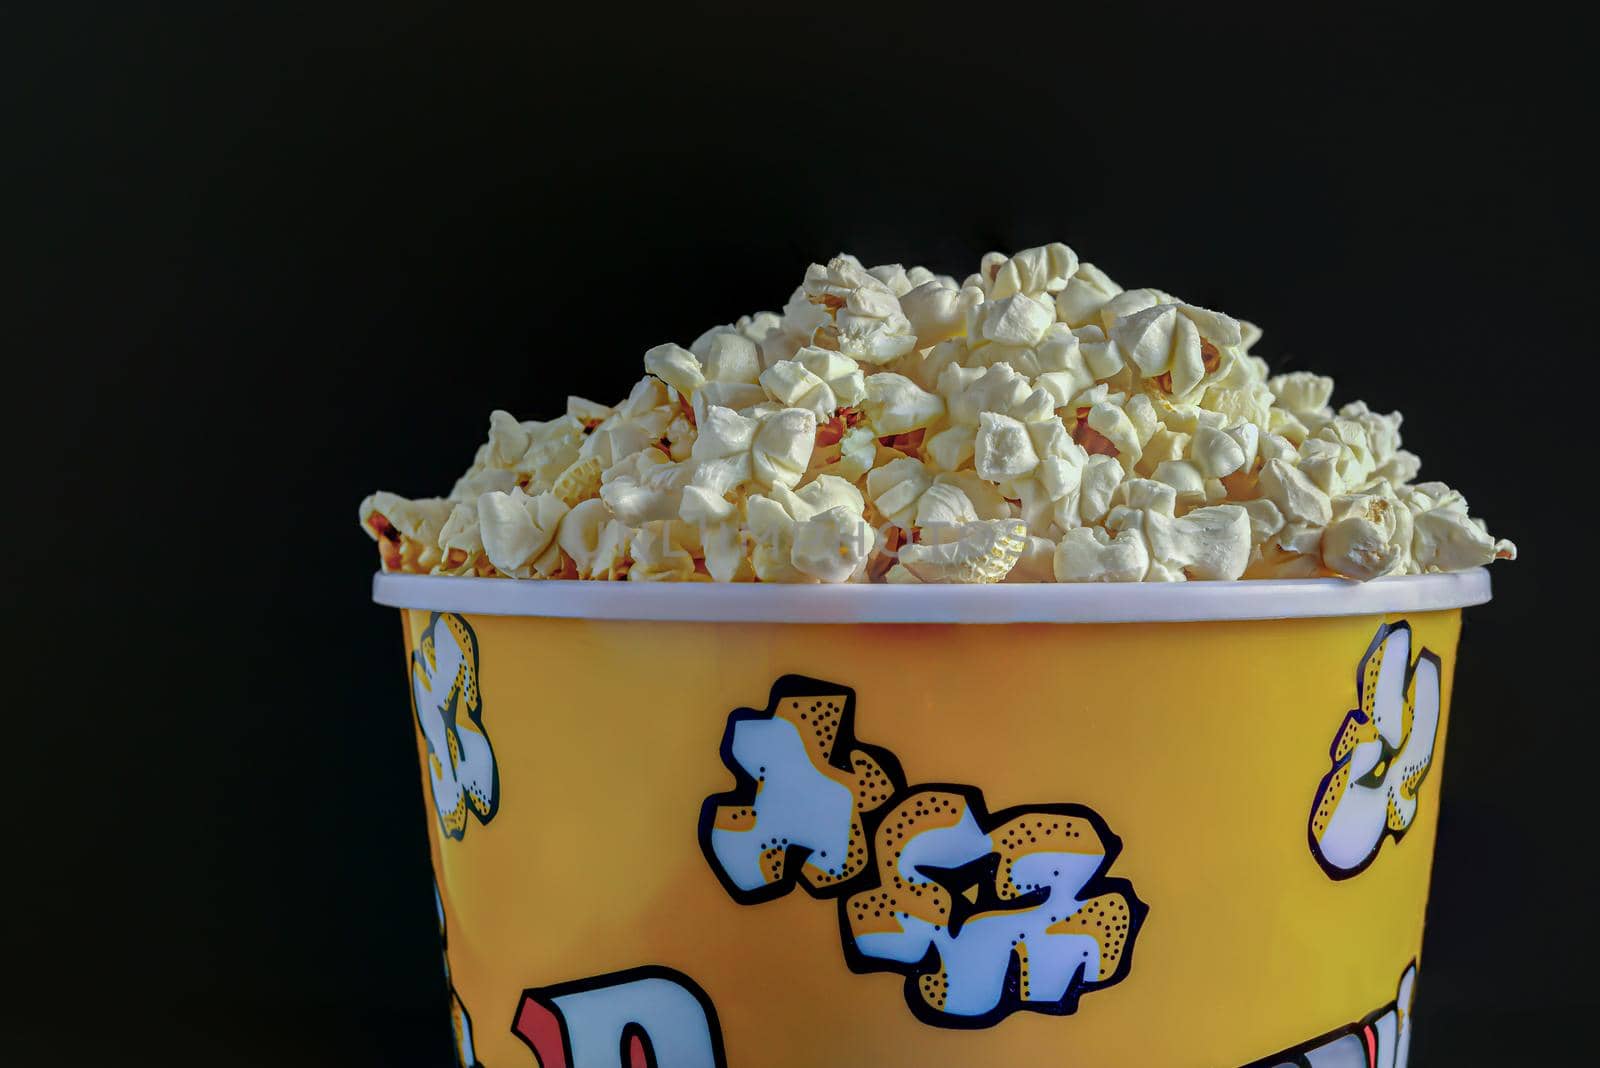 close-up of a popcorn container with colored letters on a black background